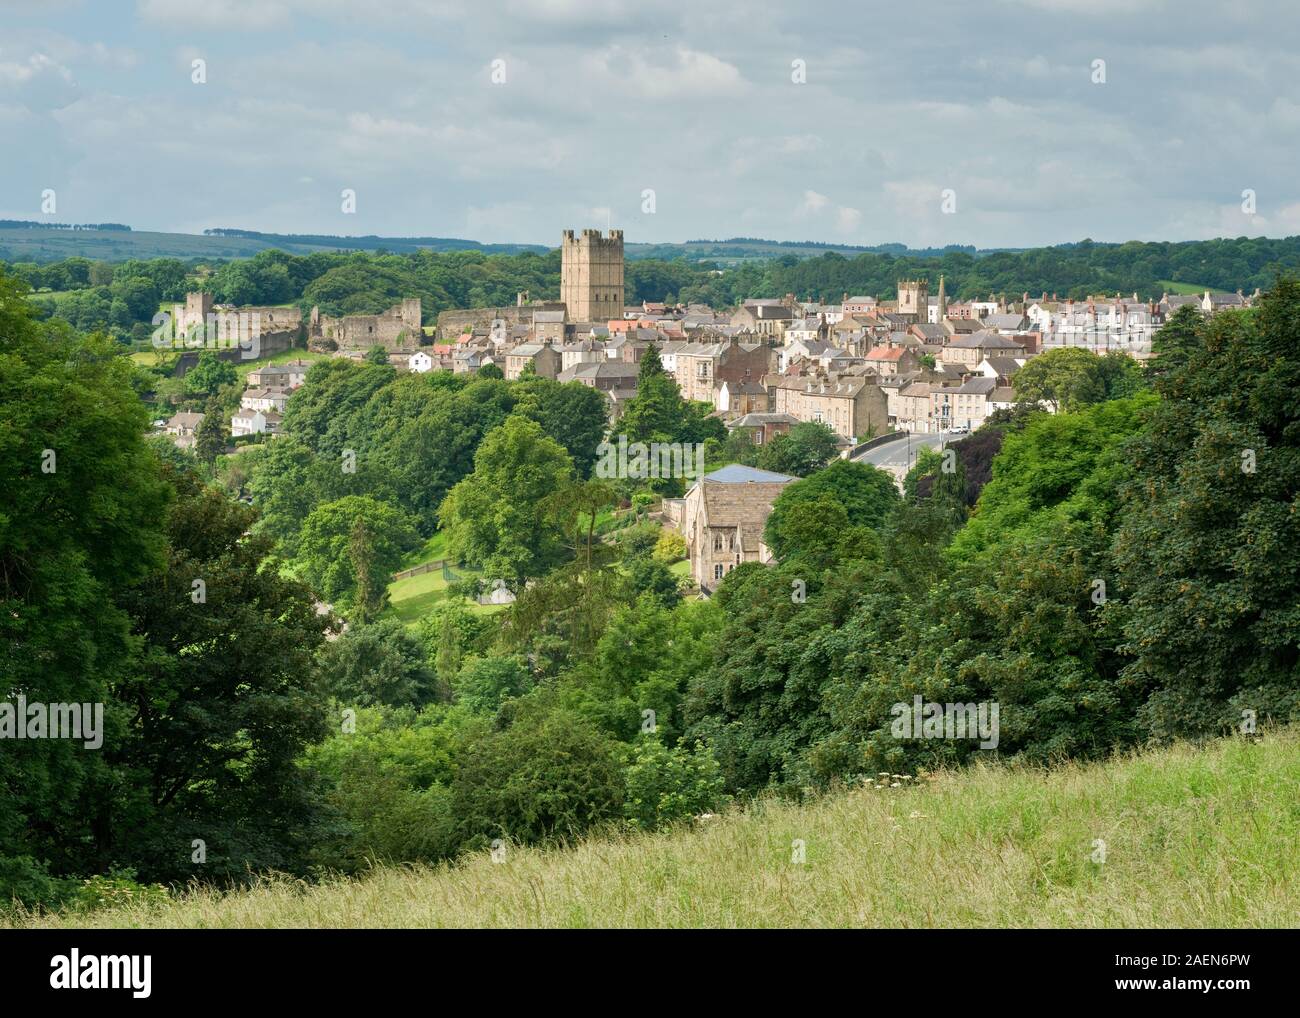 Richmond Castle and Market Town. Yorkshire Dales National Park, North Yorkshire, England Stock Photo